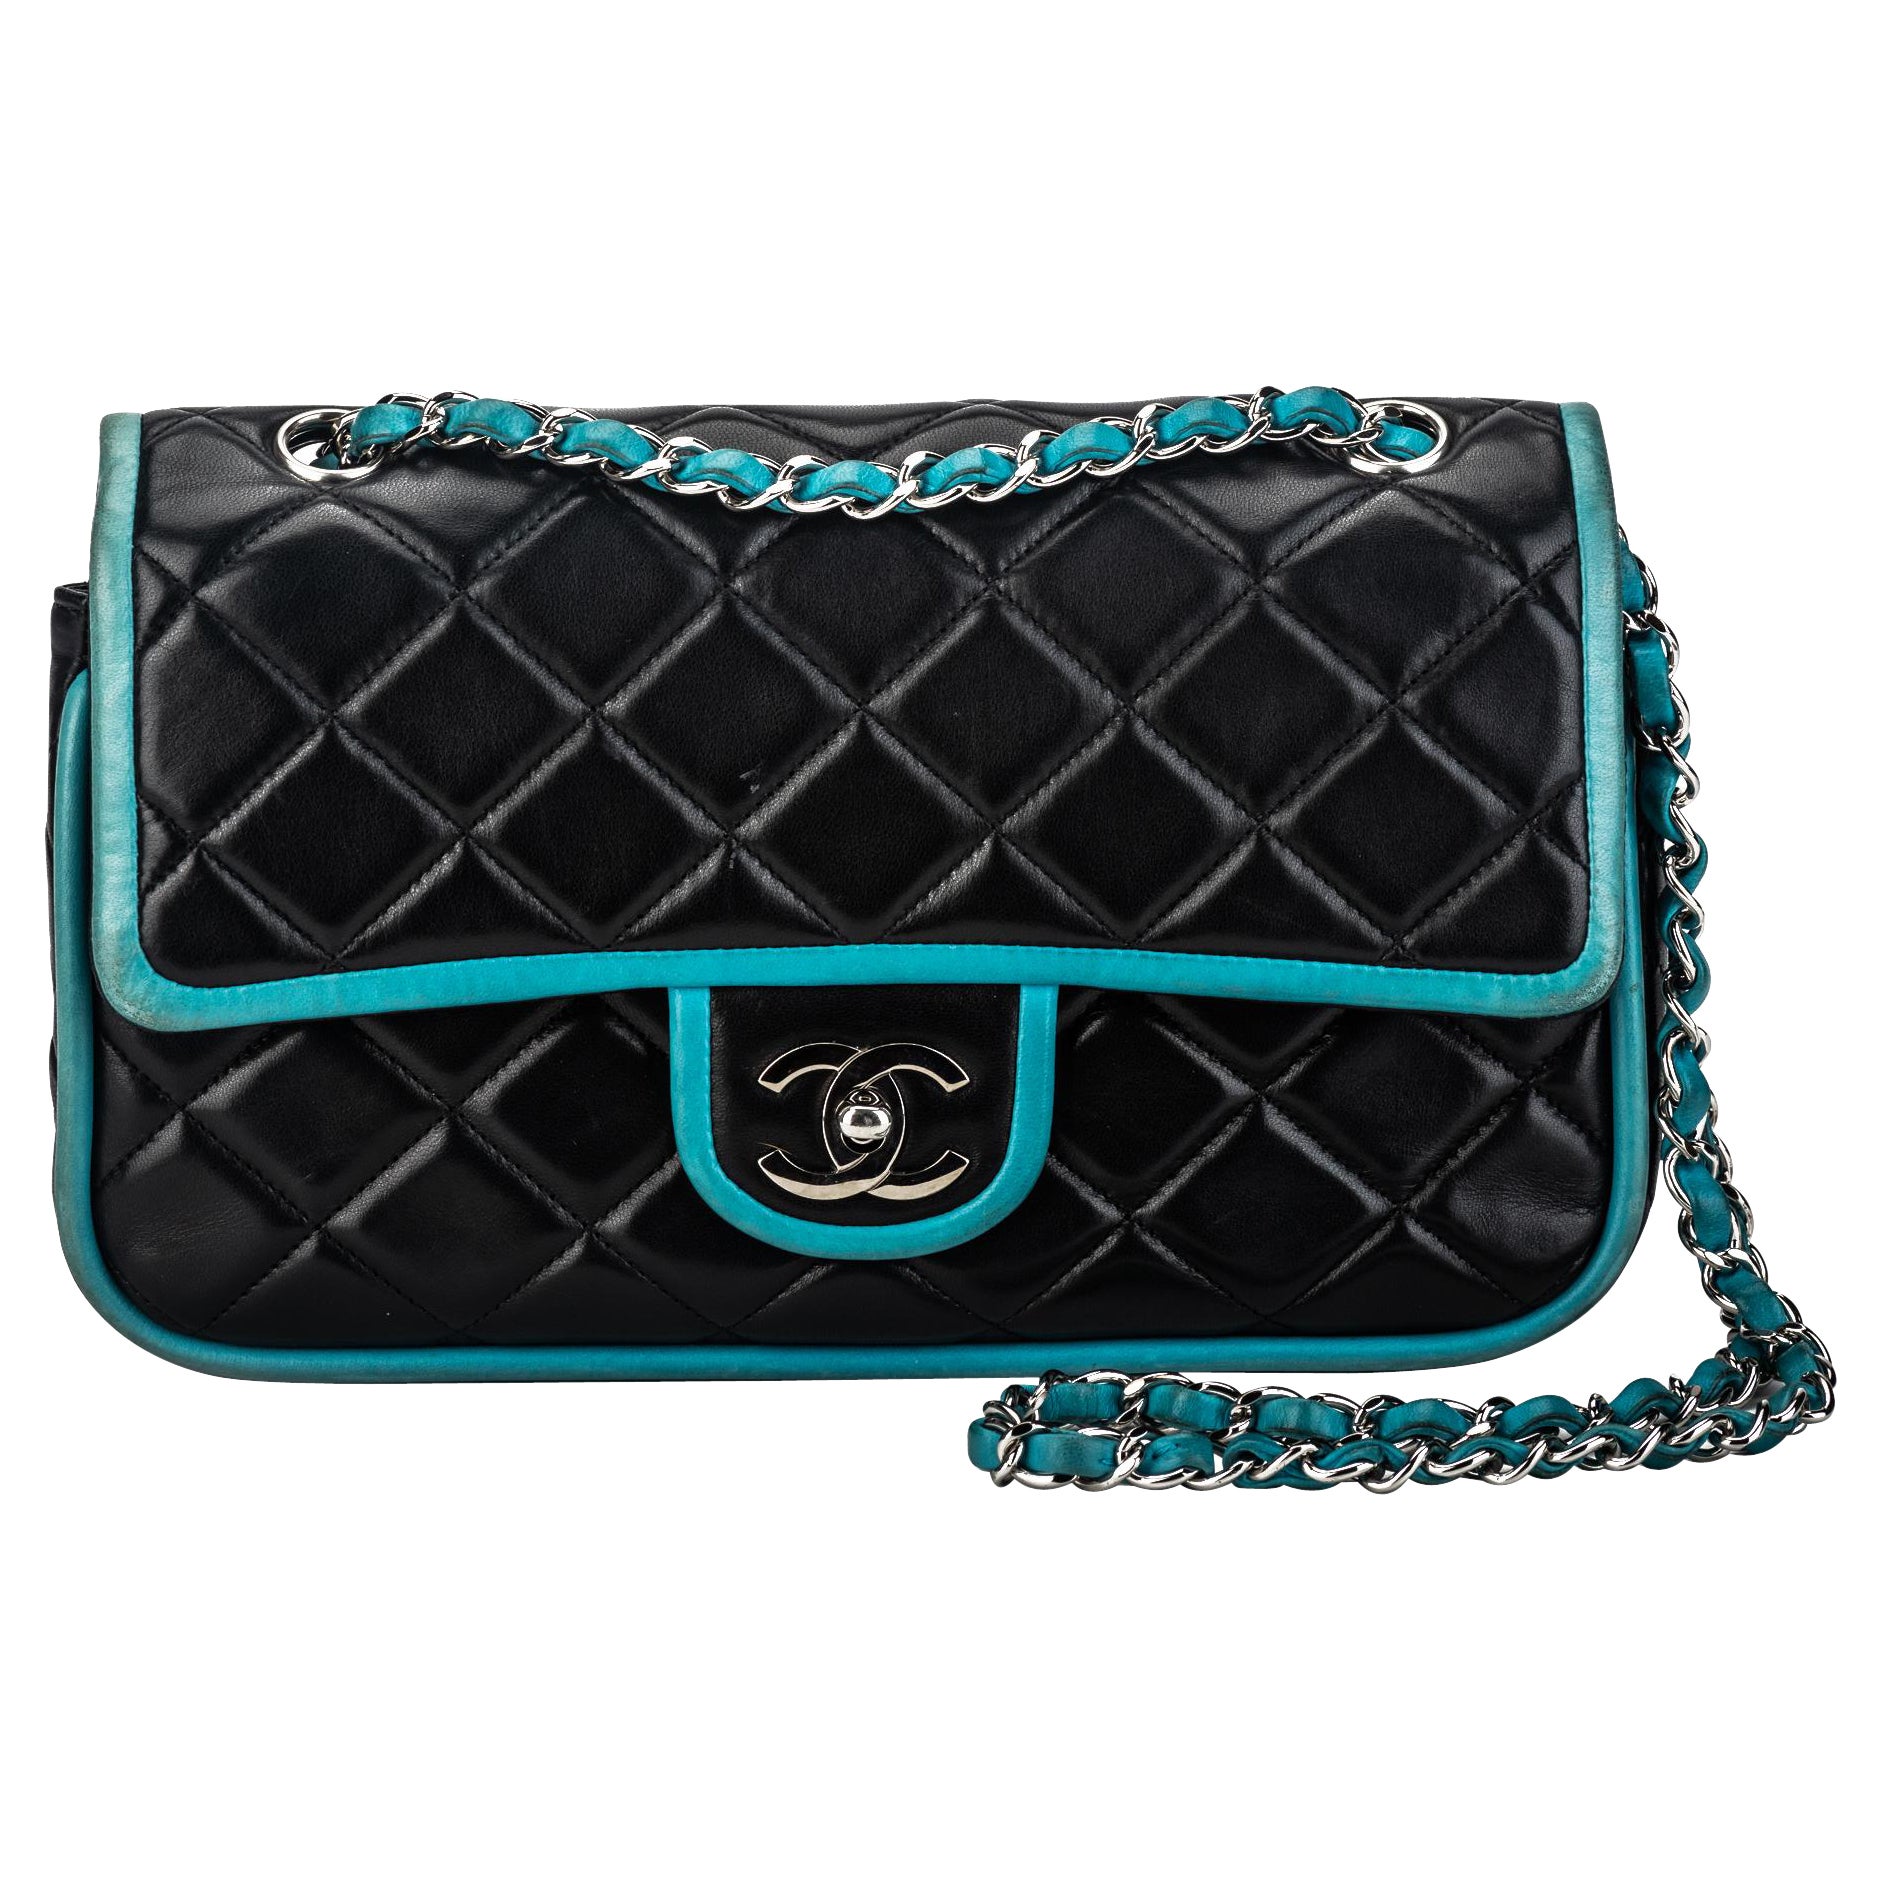 Turquoise Chanel Bag - 11 For Sale on 1stDibs